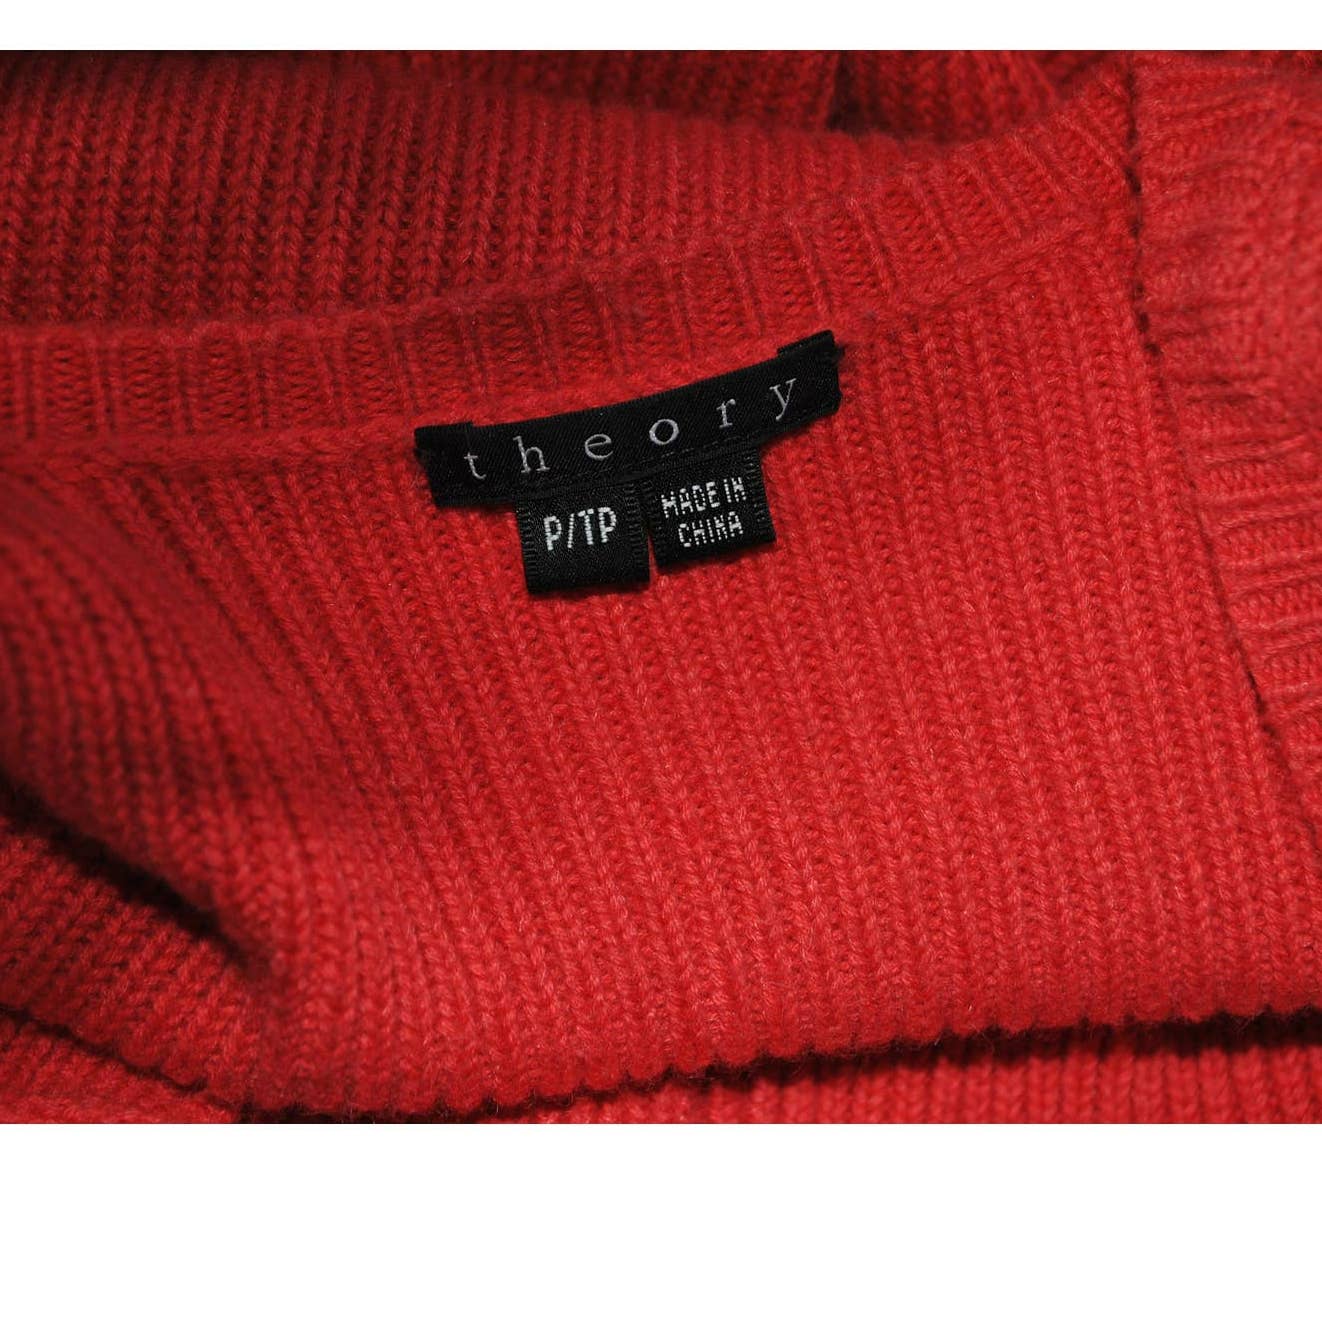 Theory Red Knit Button Front Cashmere Baby Alpaca SIlk Dress - XS (P)